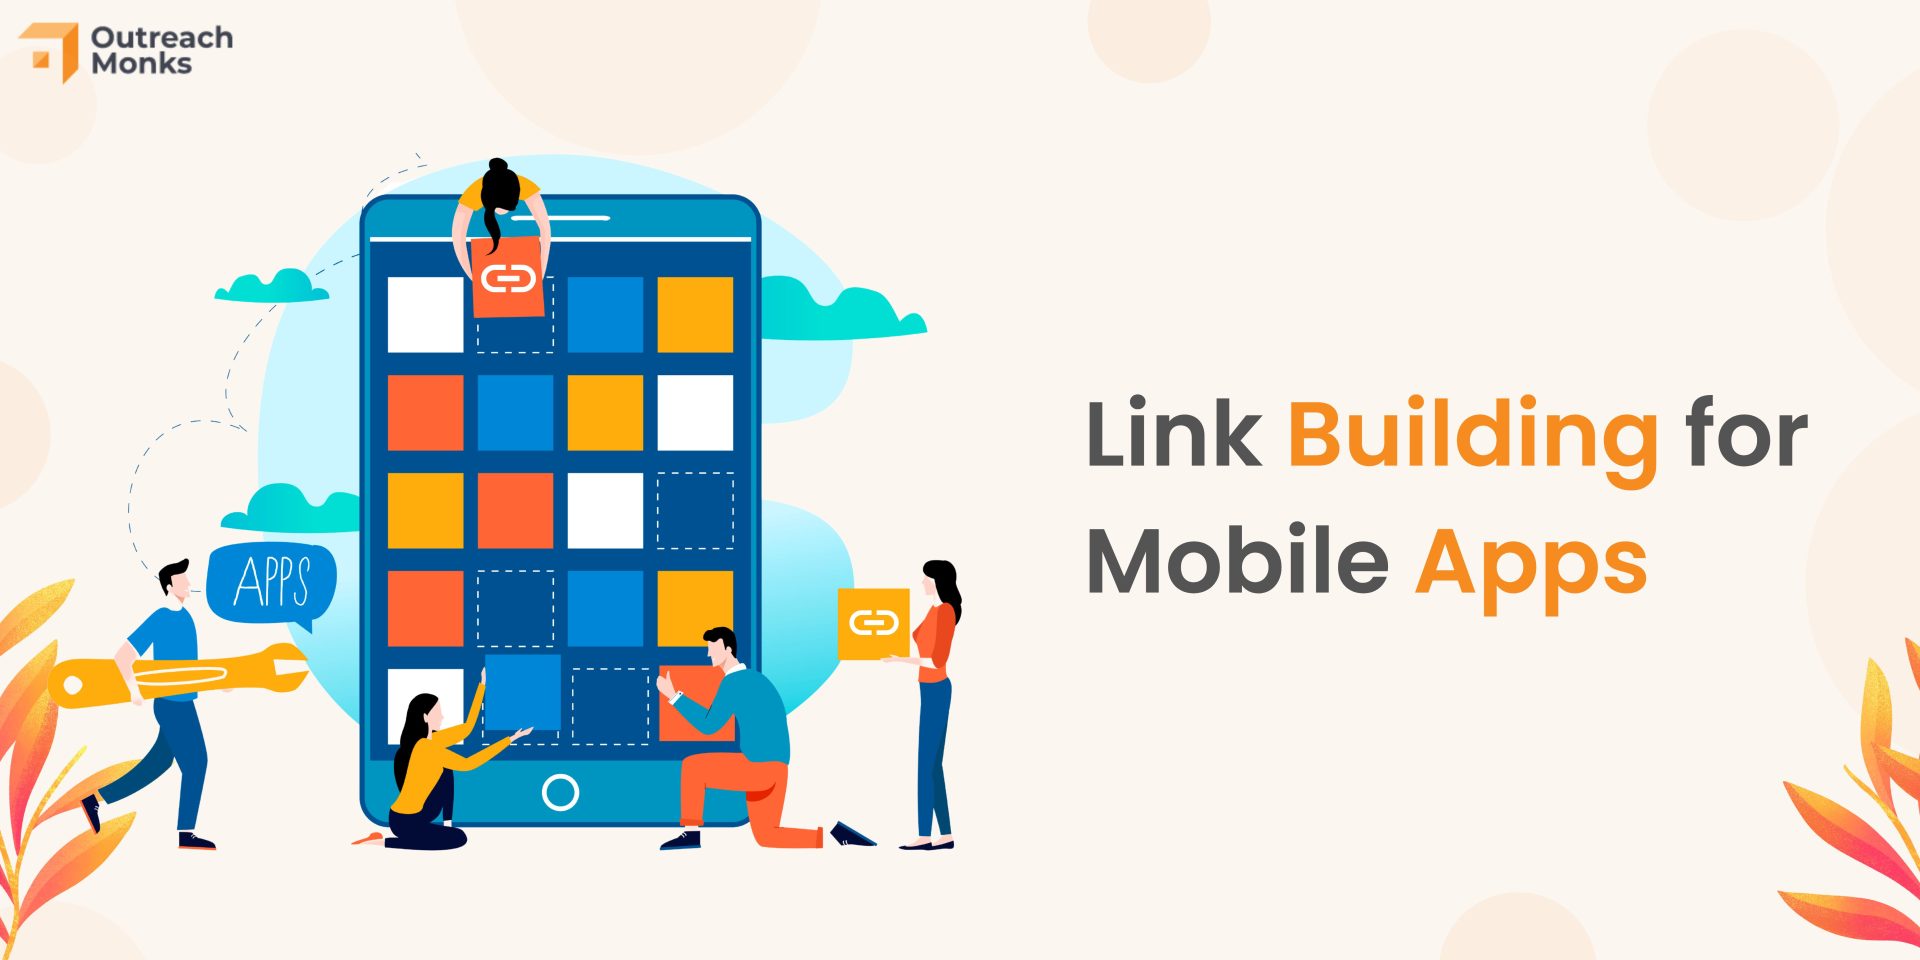 10 Smart Techniques of Link Building for Mobile App Marketers